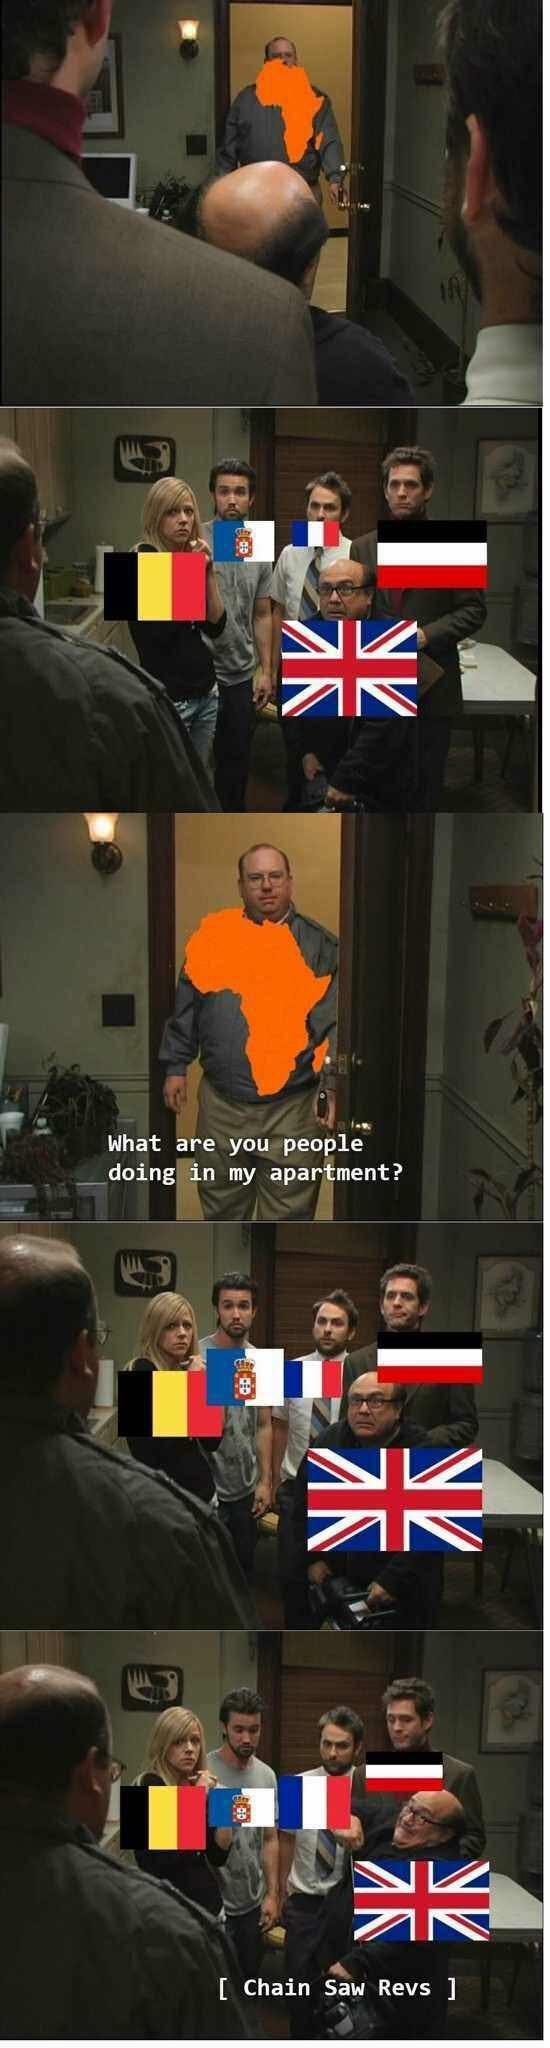 Always Sunny in Philadelphia - Man Walking into People's Apartment - Colonization of Africa